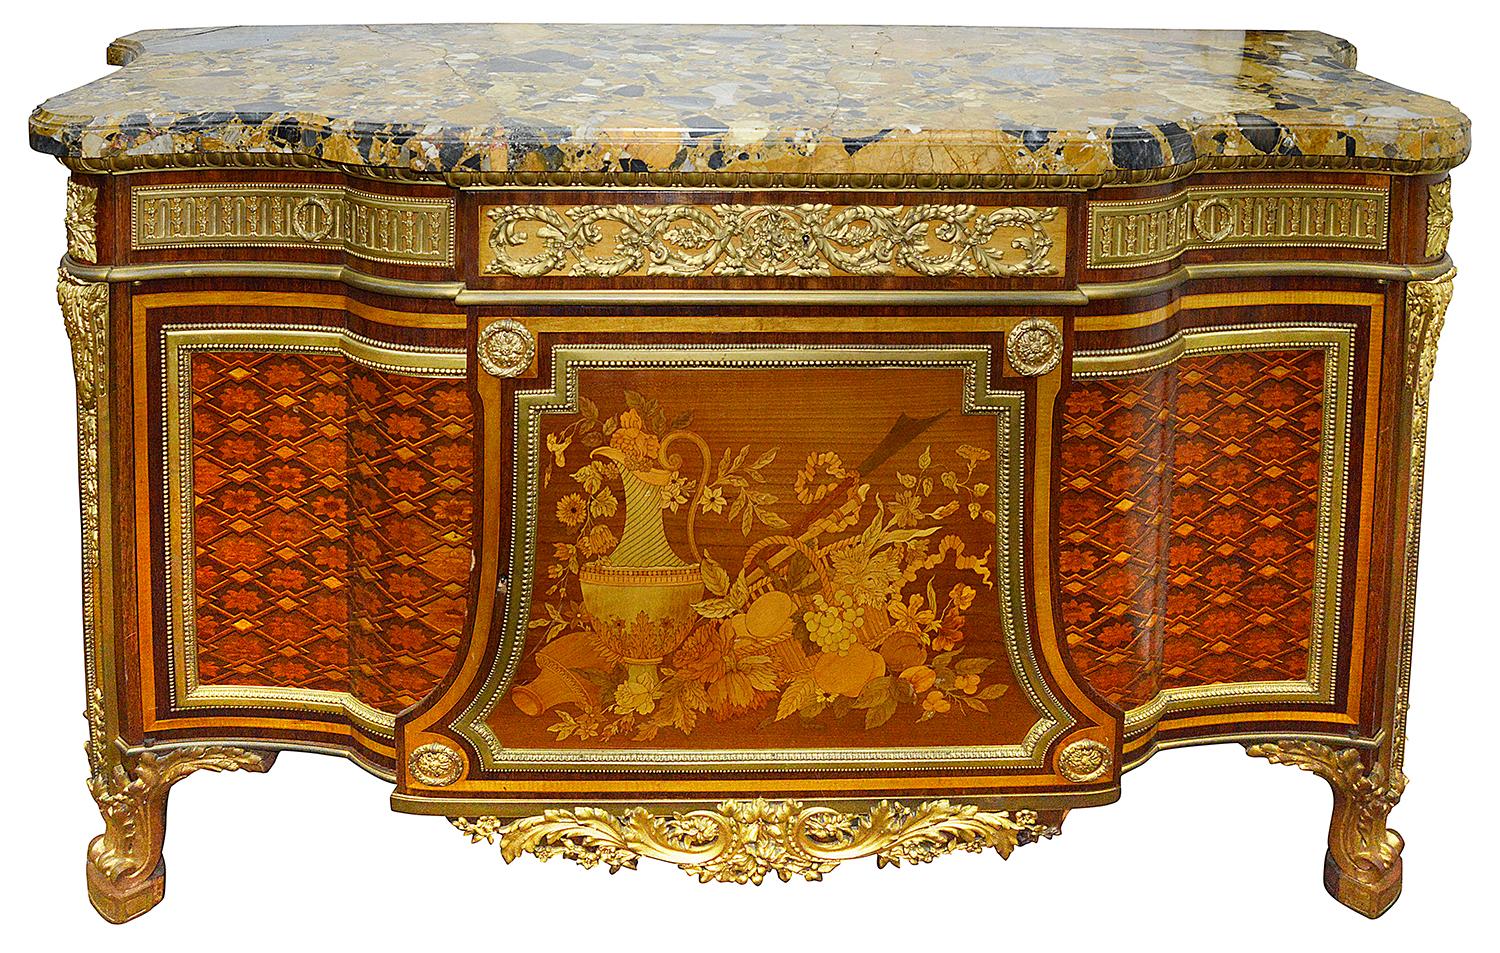 A French ormolu mounted mahogany and sycamore marquetry and parquetry inlaid commode.
After a model by Jean-Henri Riesener.
The shaped yellow and black-veined marble top above a breakfront frieze with three drawers over two cupboard doors